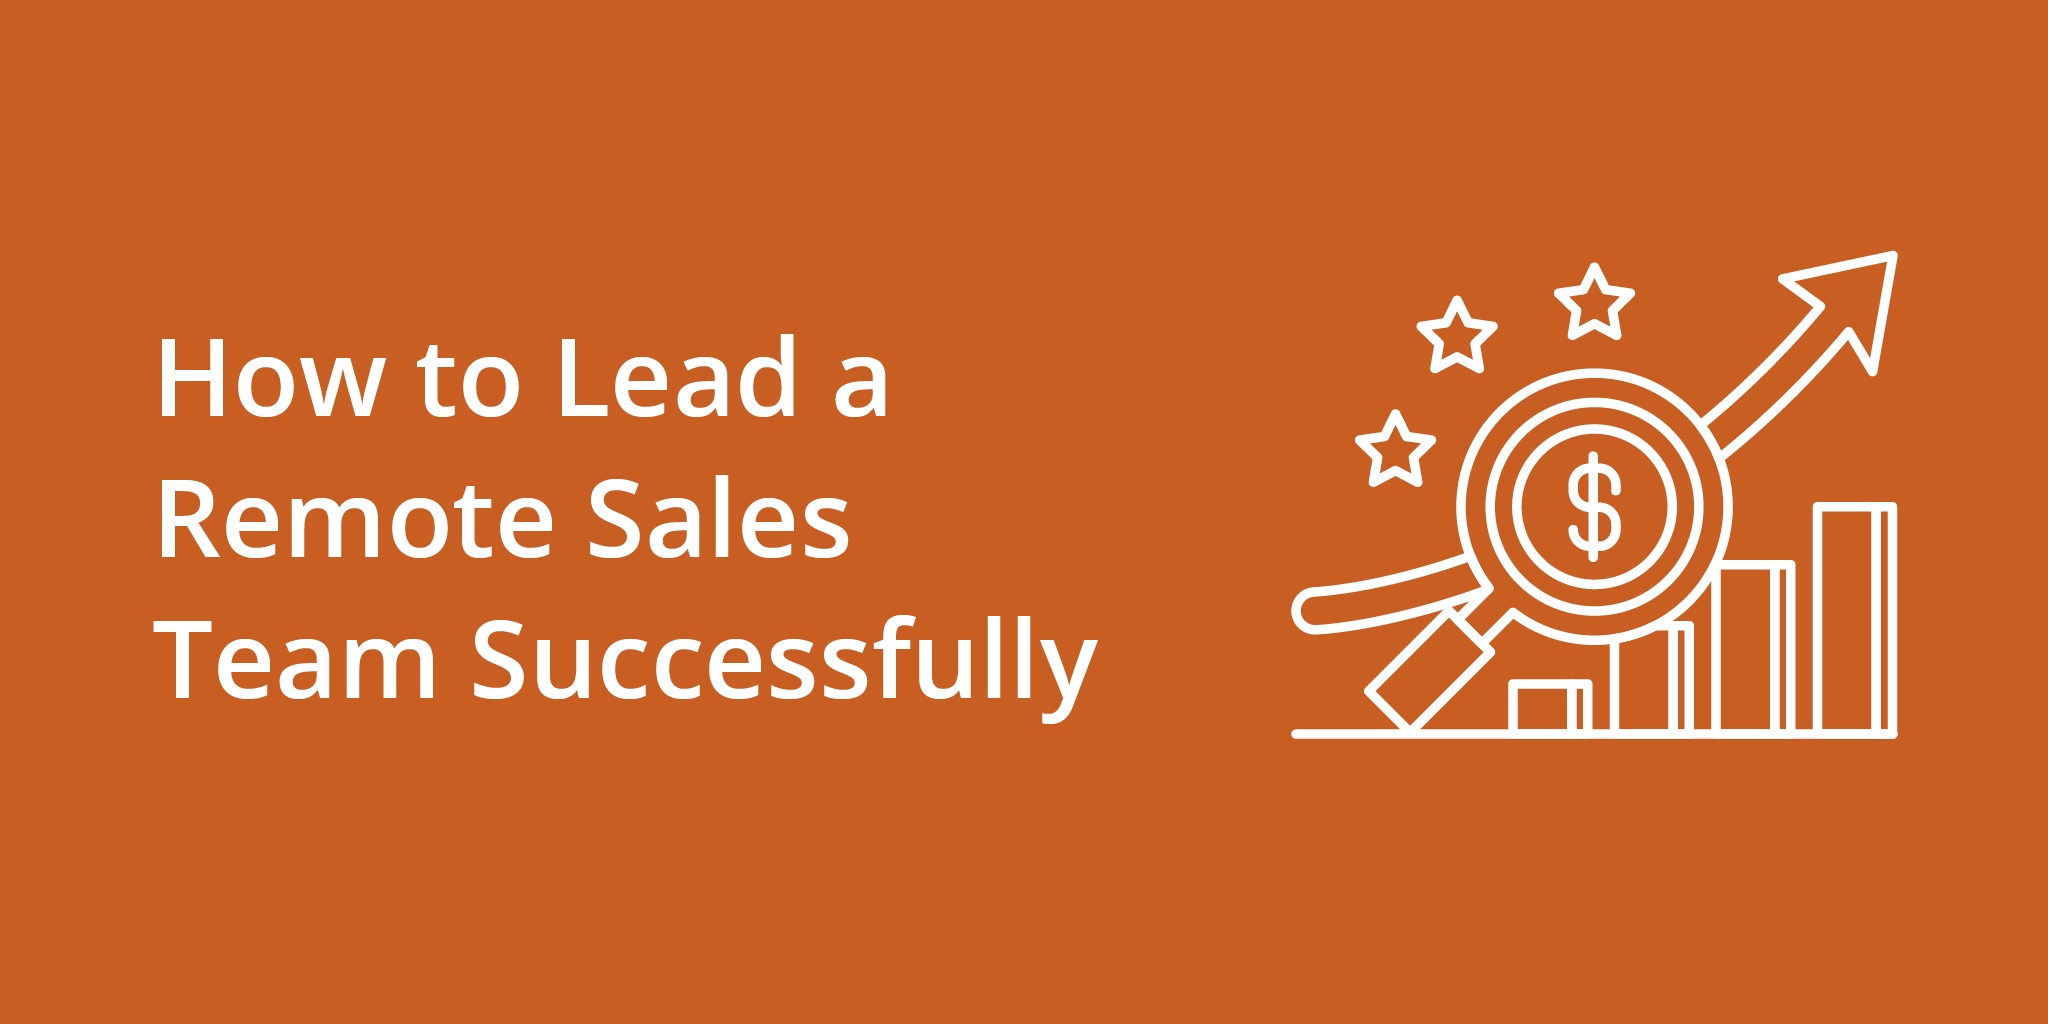 How to Lead a Remote Sales Team Successfully | Telephones for business